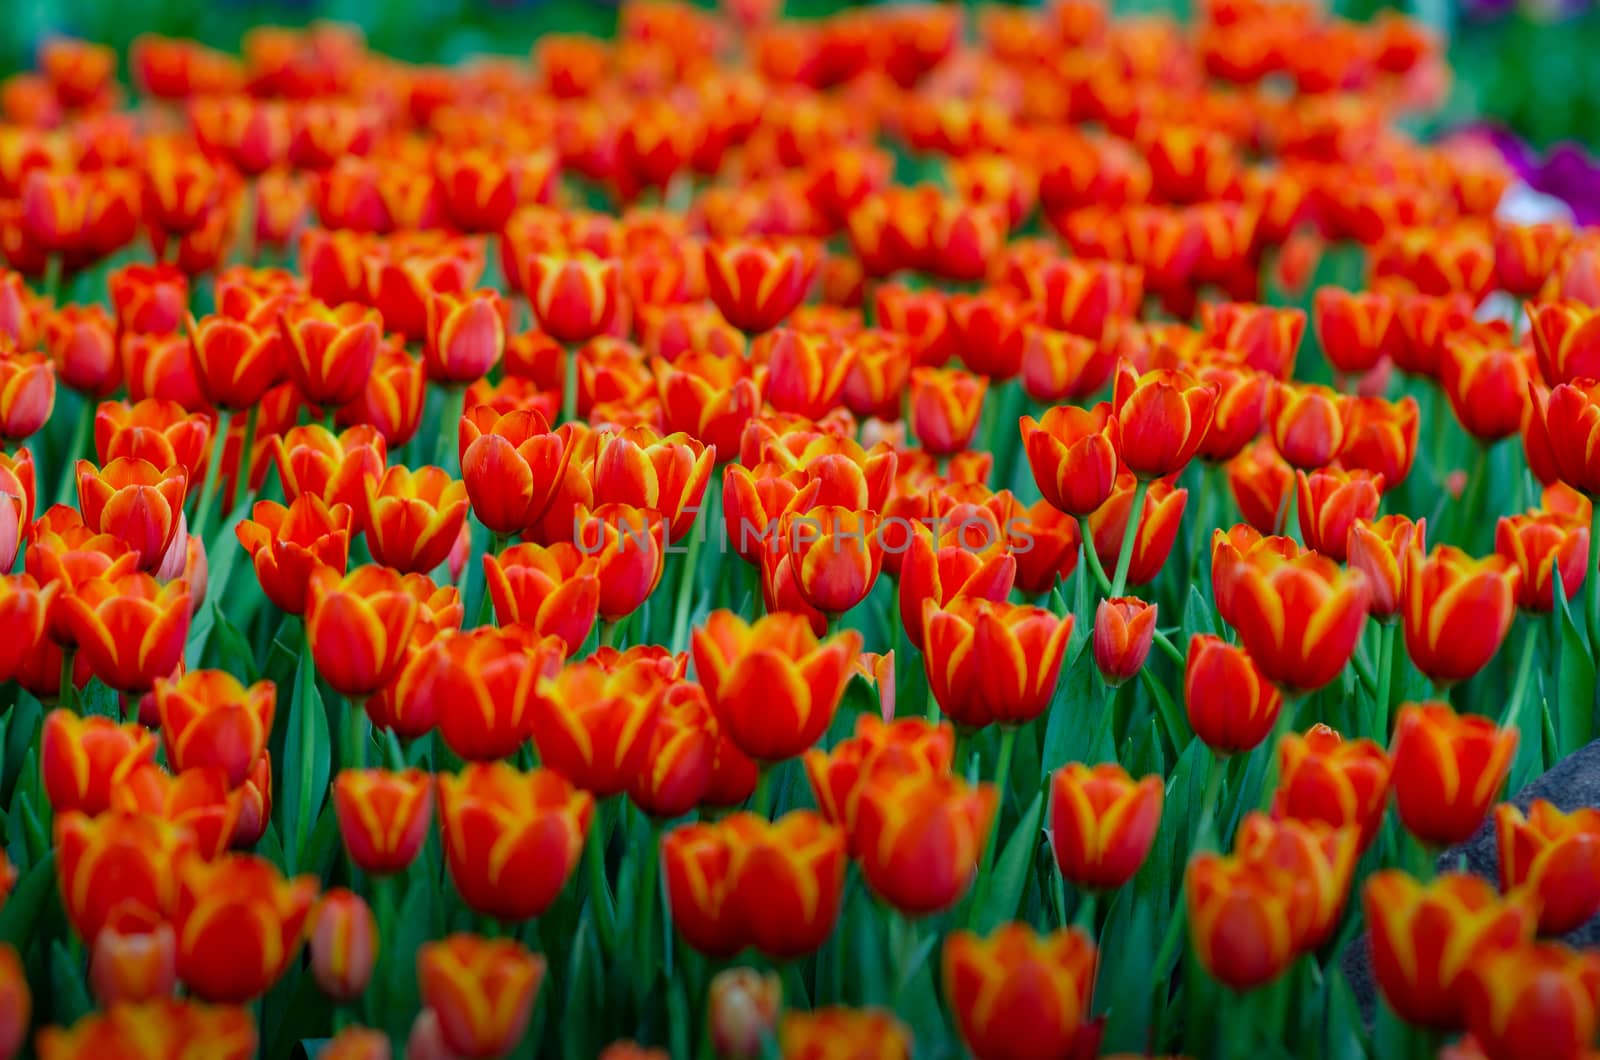 The red yellow tulip fields are densely blooming by sarayut_thaneerat